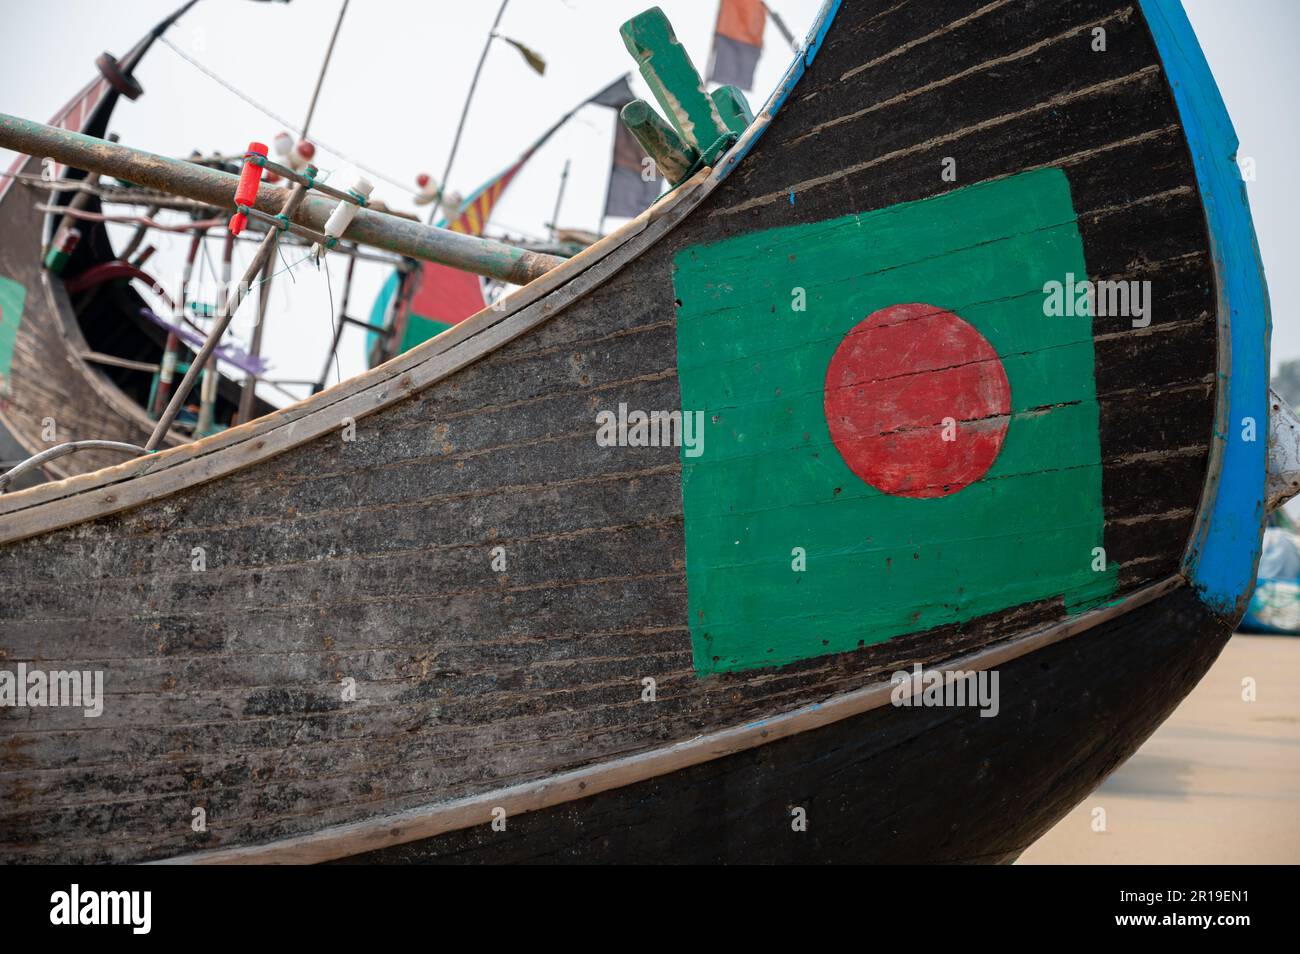 Unique moon shaped fishing boat only found at Cox's Bazar in Bangladesh - home of the world's longest sand beach. Stock Photo